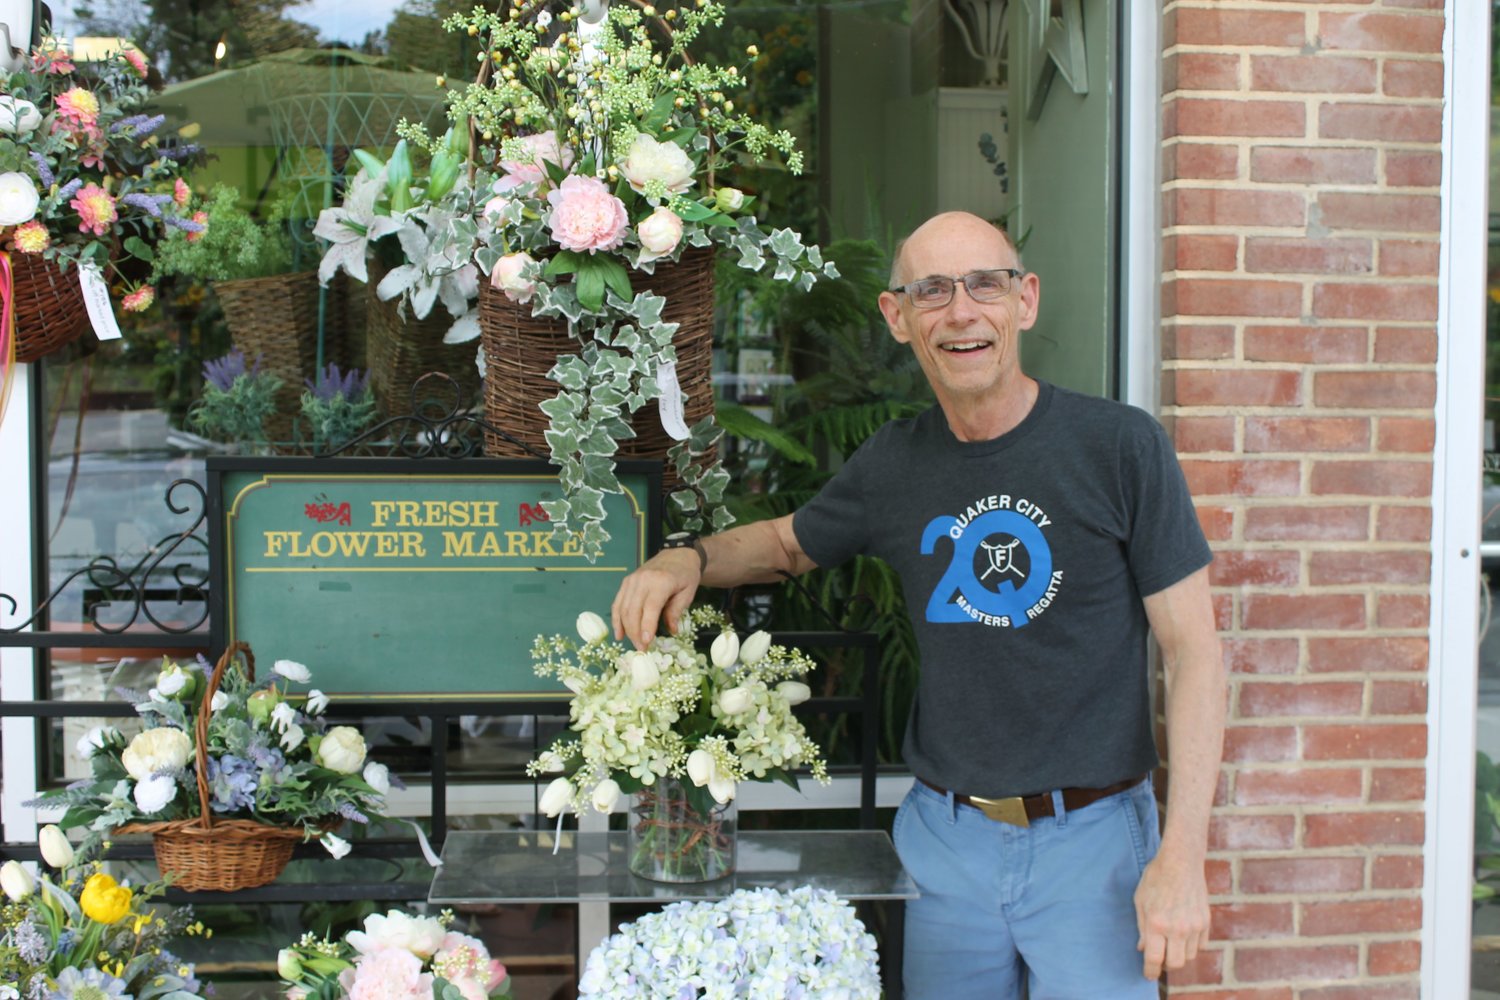 On behalf of Severna Flowers & Gifts, owner Bill Dyott accepted the award for Best Florist.